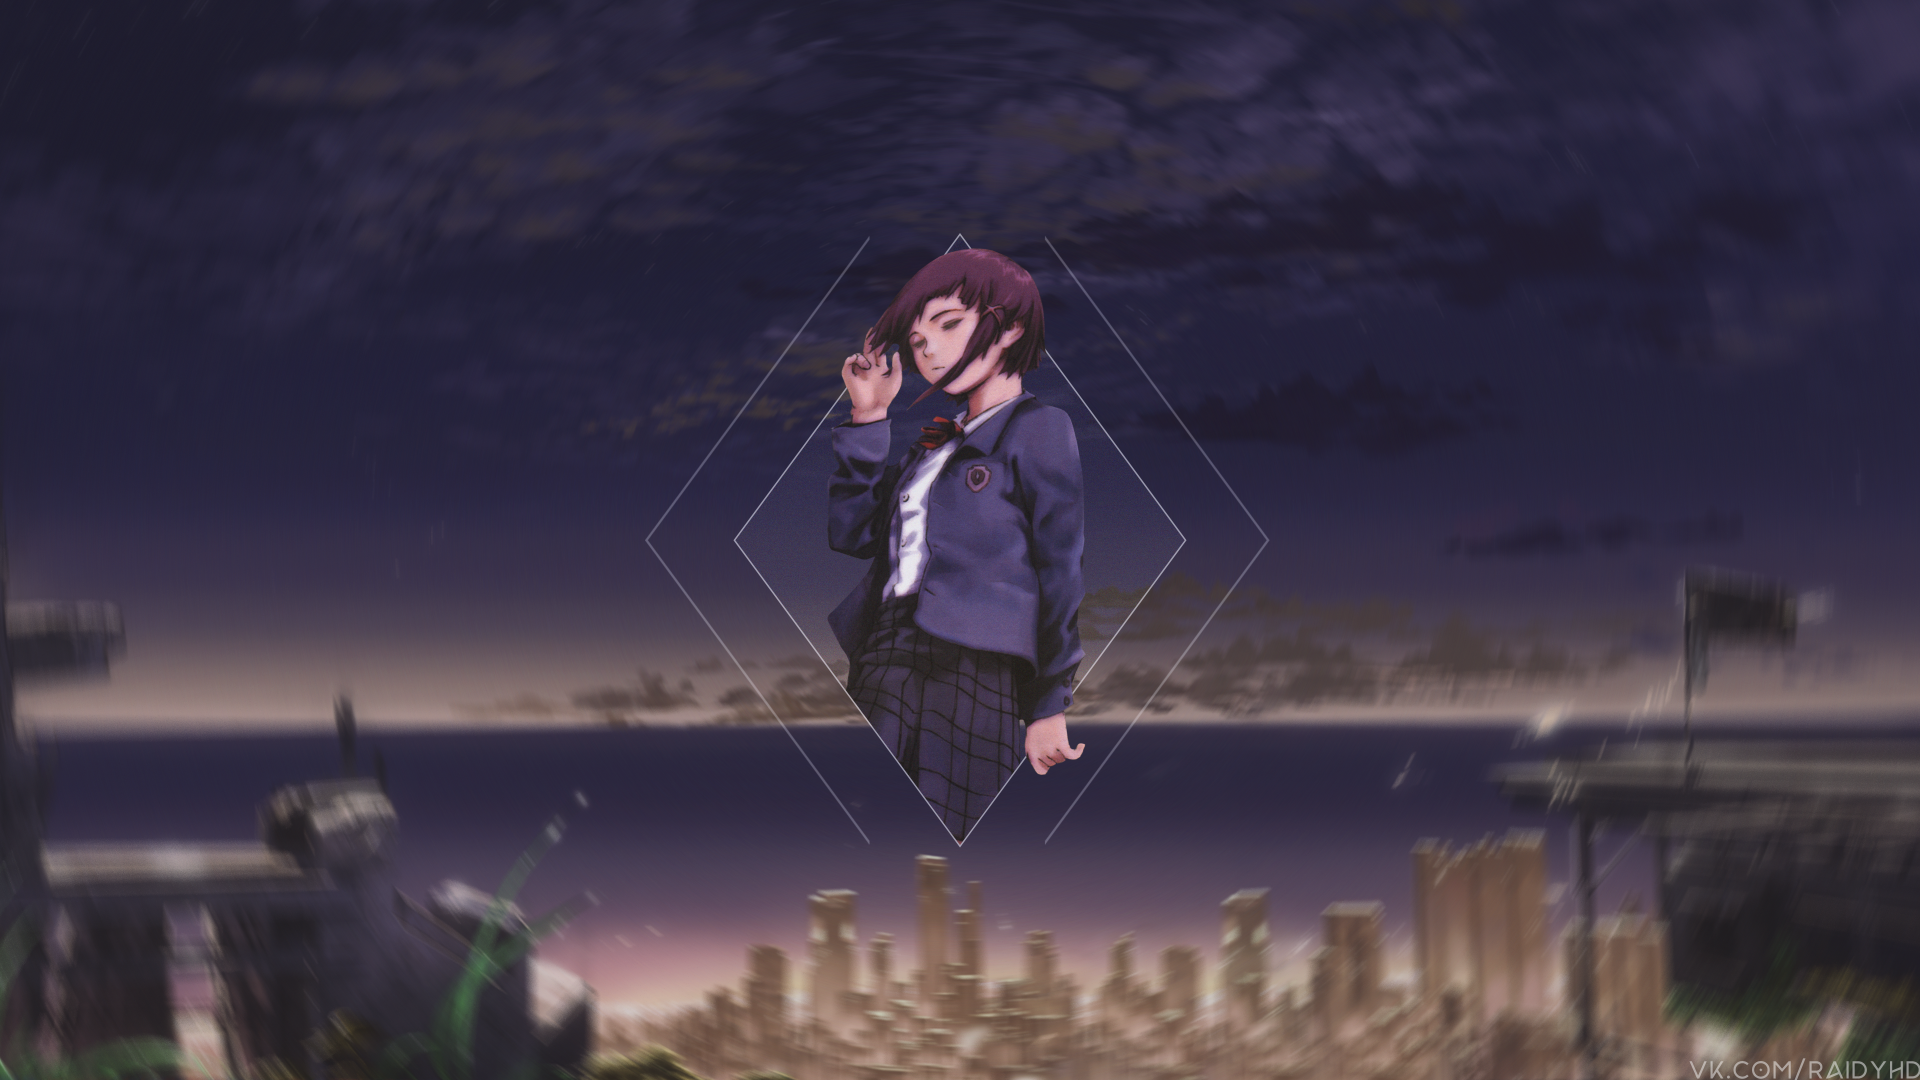 Serial Experiments Lain 4k Ultra Hd Wallpaper Background Image 3840x2160